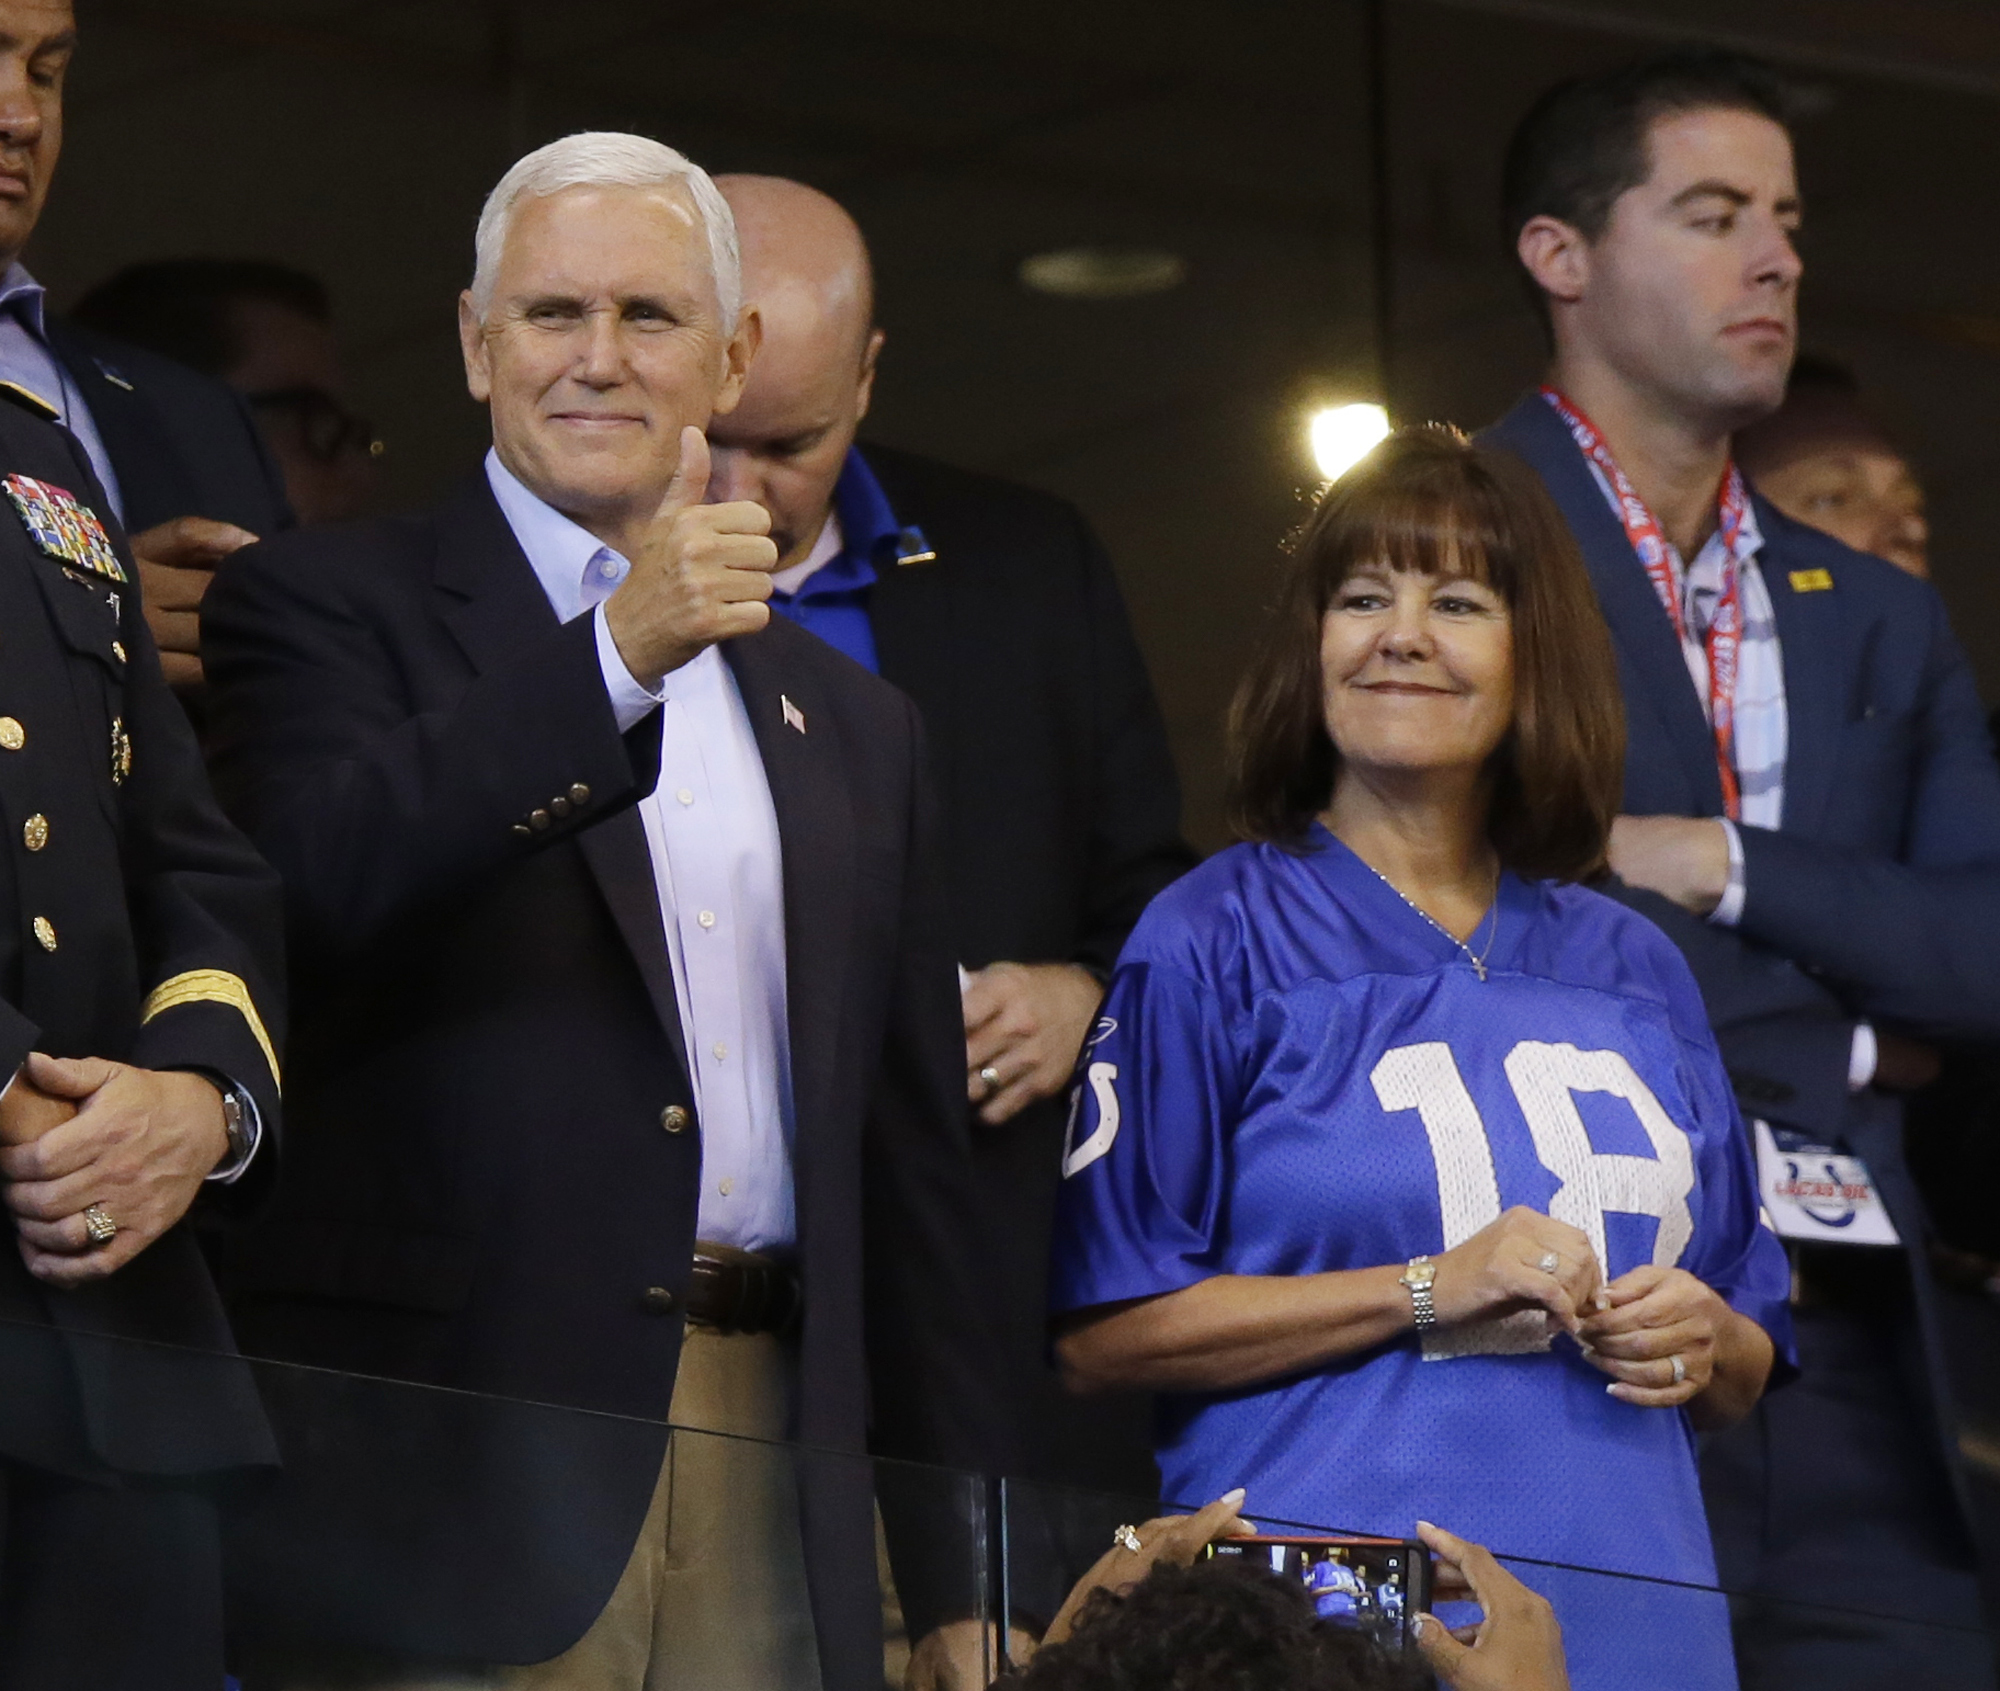 Vice President Mike Pence at a Colts game